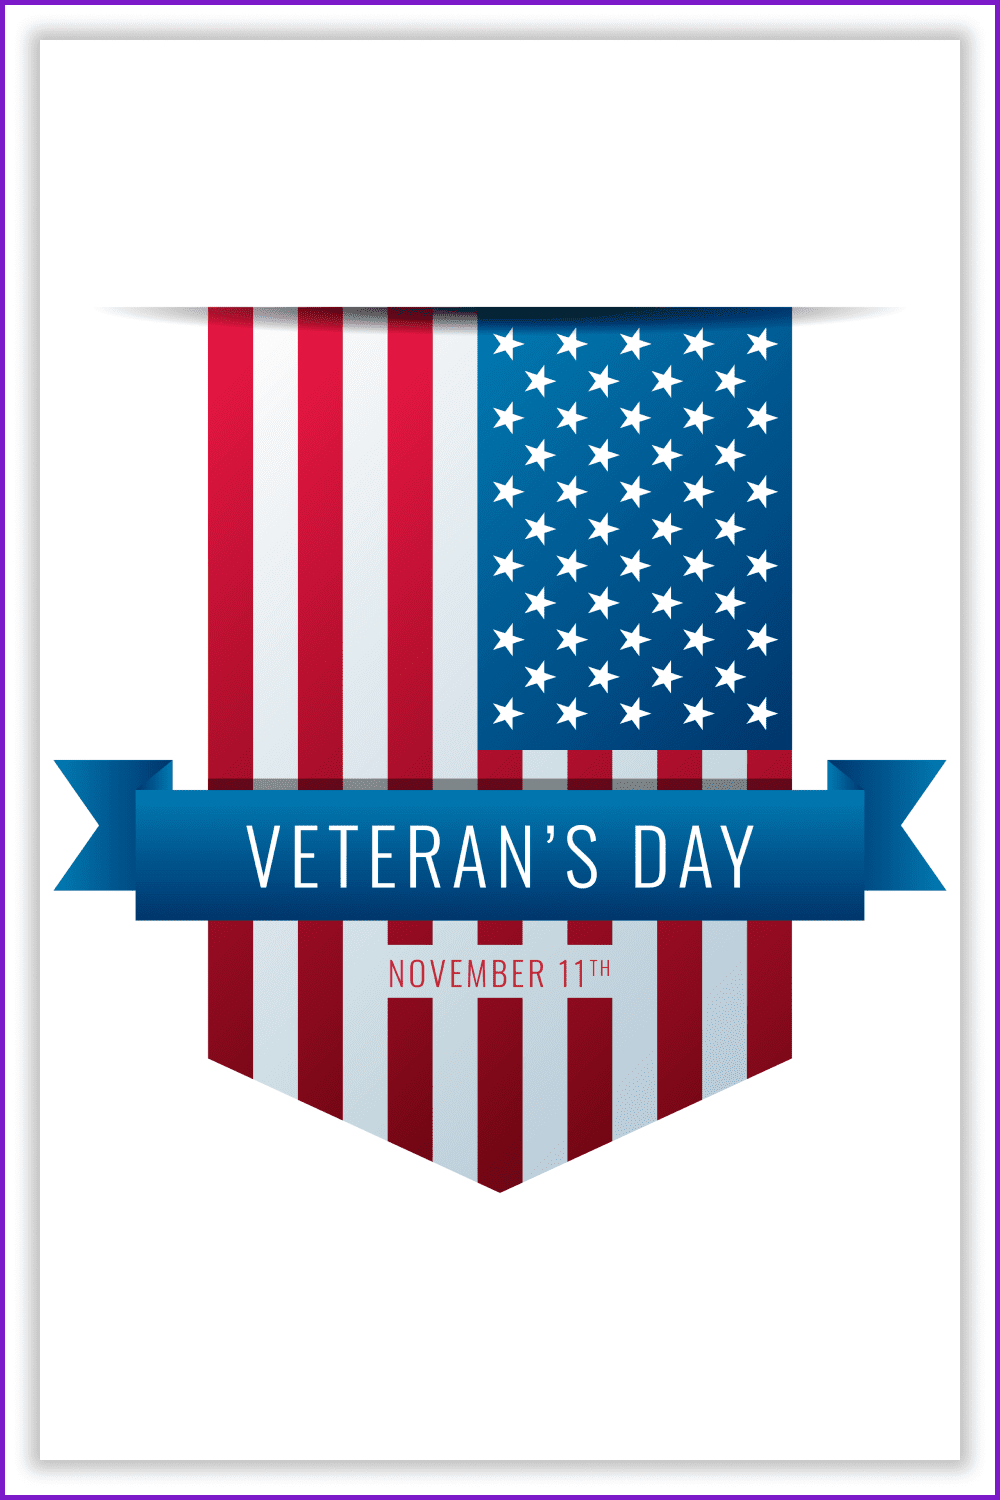 Image with American Flag Ribbon and inscription Veterans day.